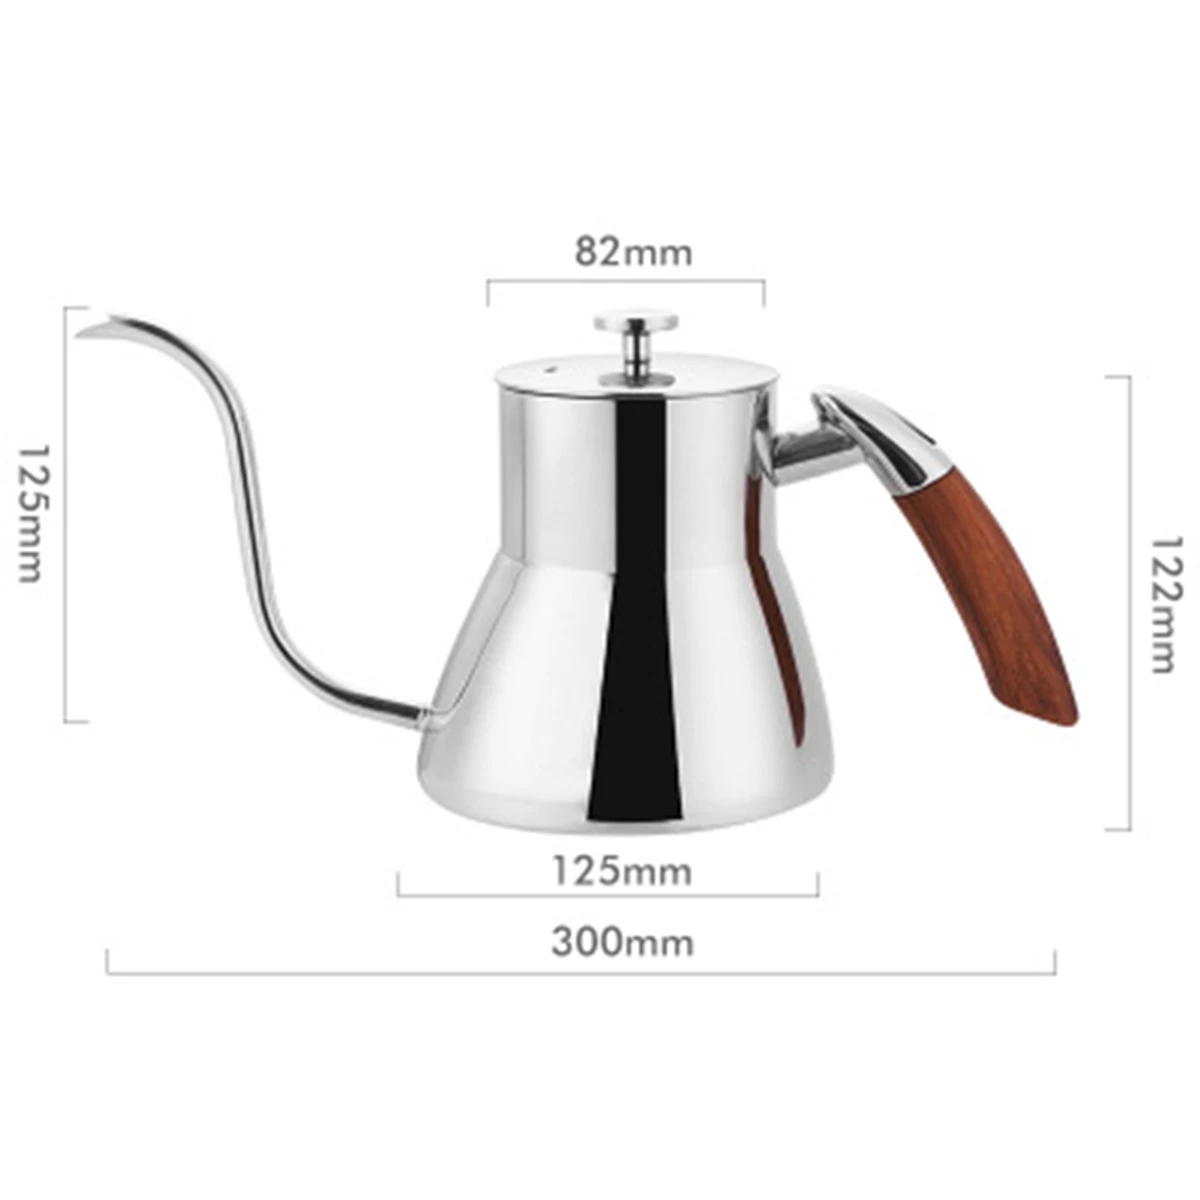 800Ml Stainless Steel Mounting Bracket Hand Punch Pot Coffee Pots with Lid Drip Gooseneck Spout Long Mouth Coffee Kettle Teapot-Black - Black